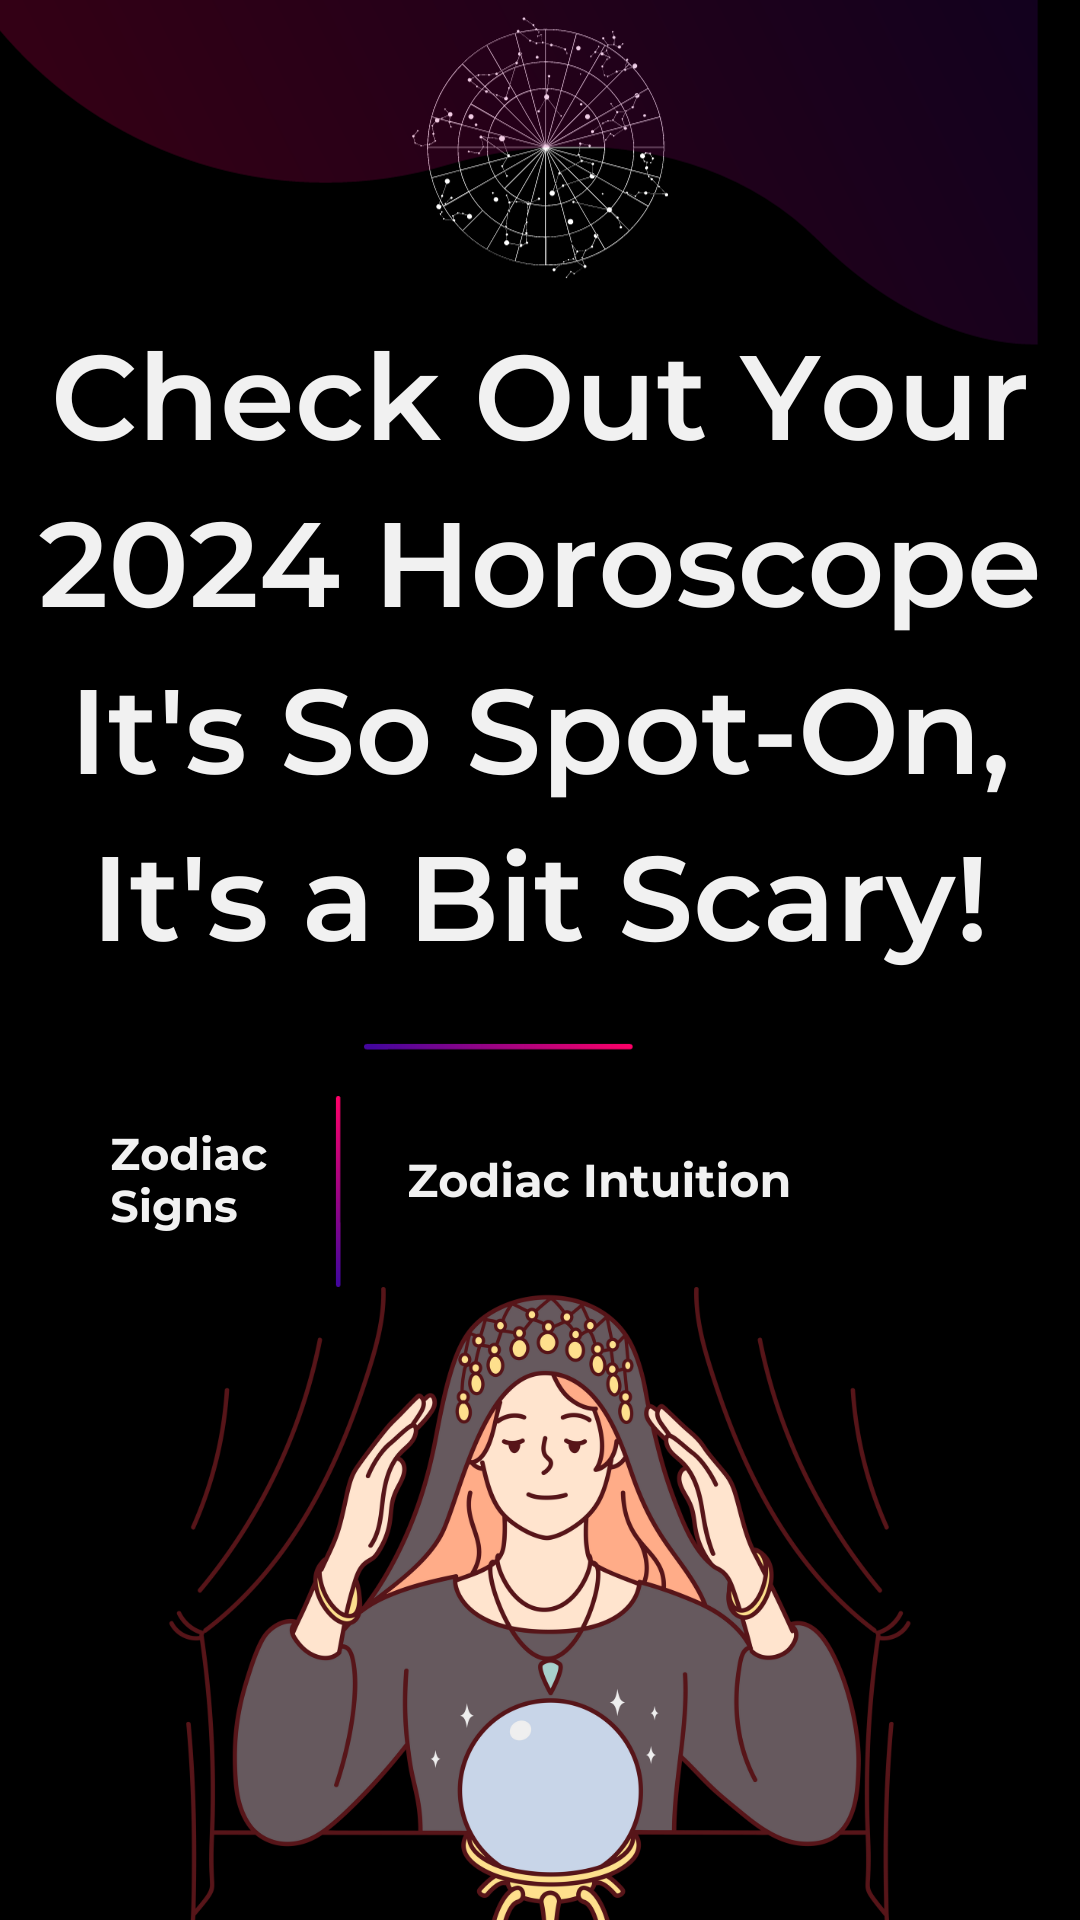 Check Out Your 2024 Horoscope - It's So Spot-On, It's a Bit Scary!